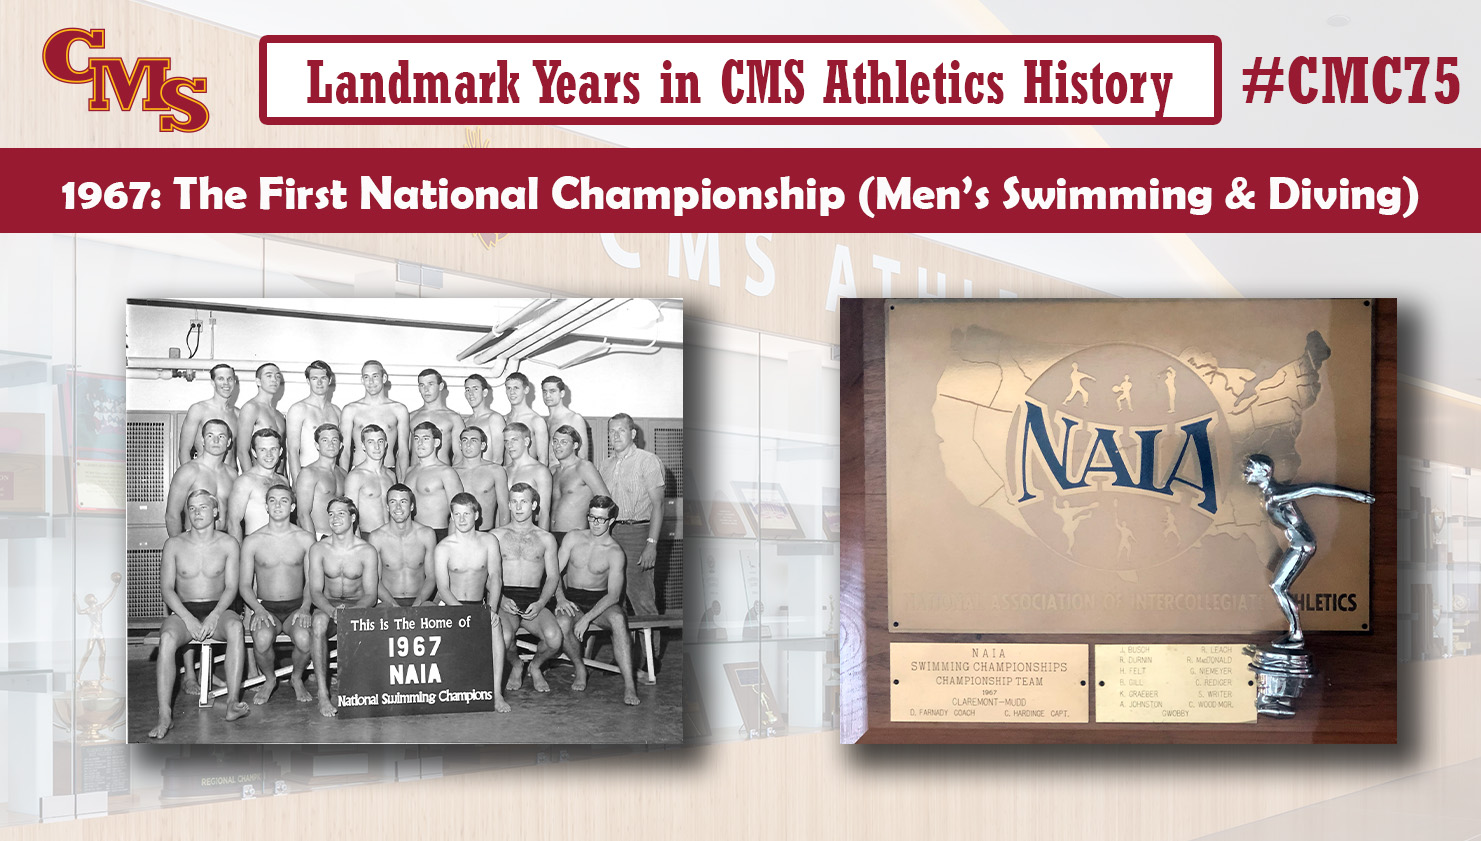 A team photo and the NAIA national championship trophy. Words over the photo read: Landmark Years in CMS Athletics History, 1967: The First National Championship (Men's Swimming and Diving)